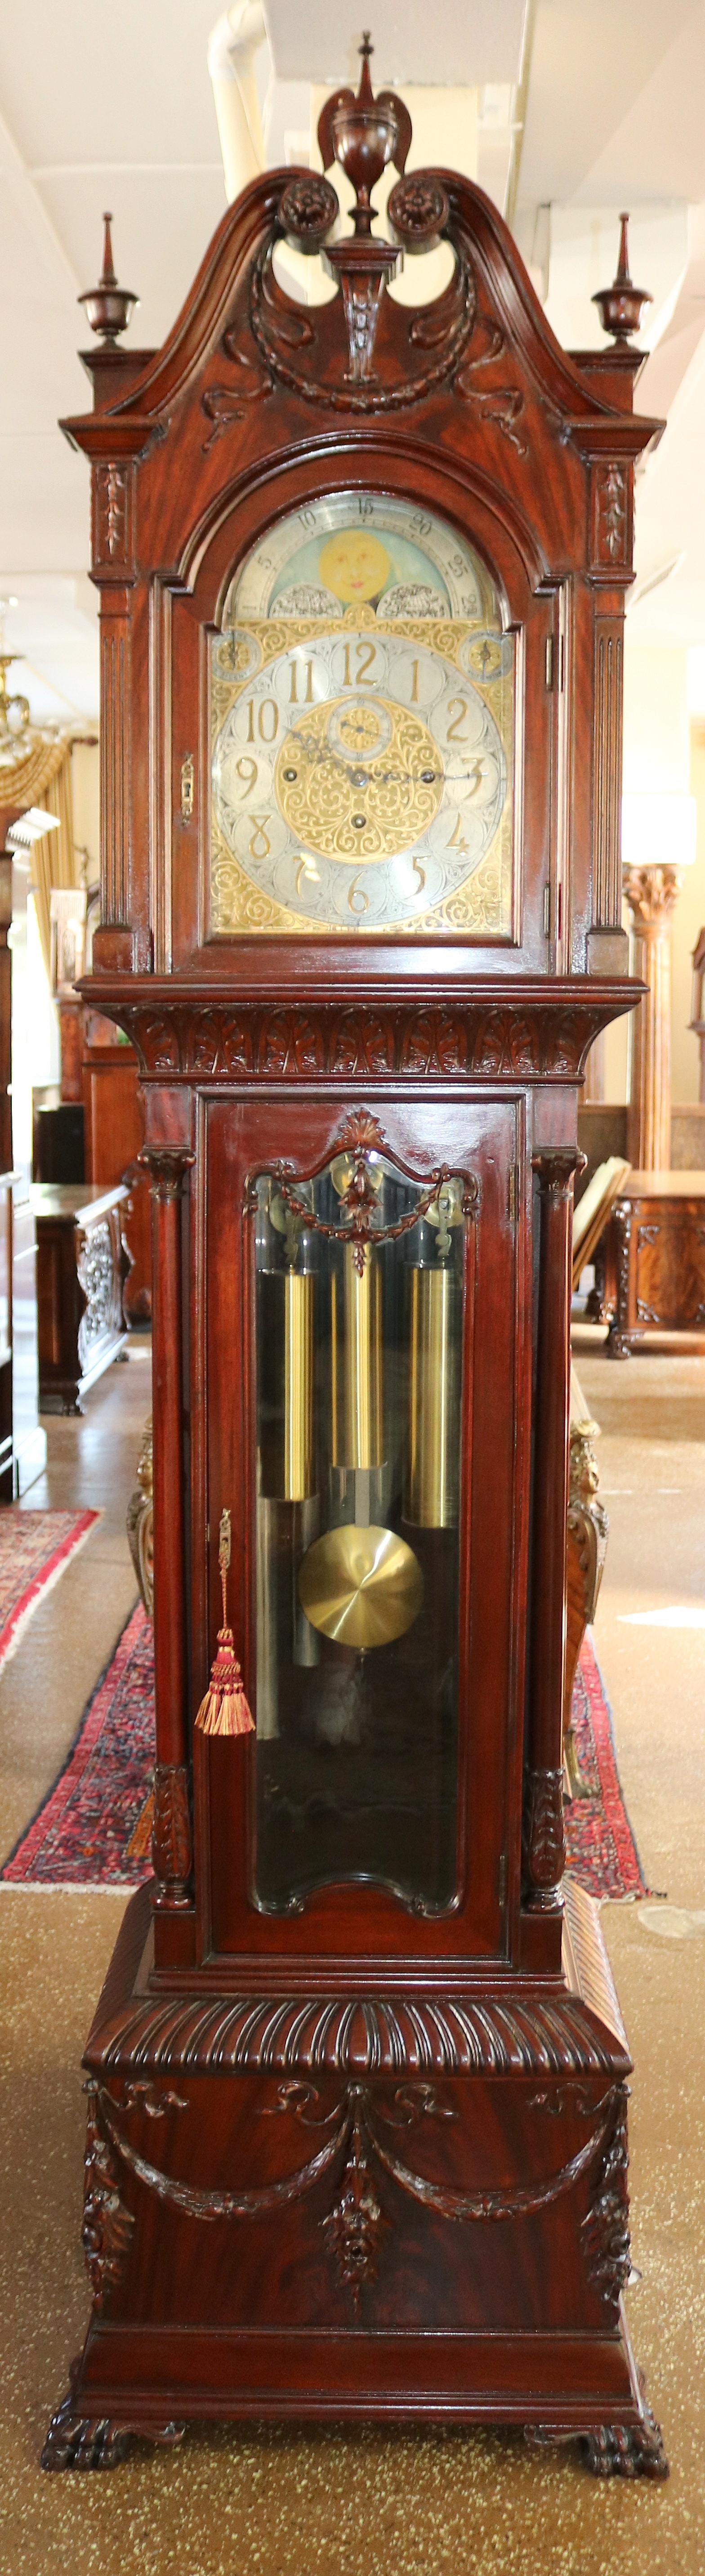 ​Late 19th Century Carved Mahogany 9 Tube Musical Tall Case Grandfather Clock

Dimensions :104